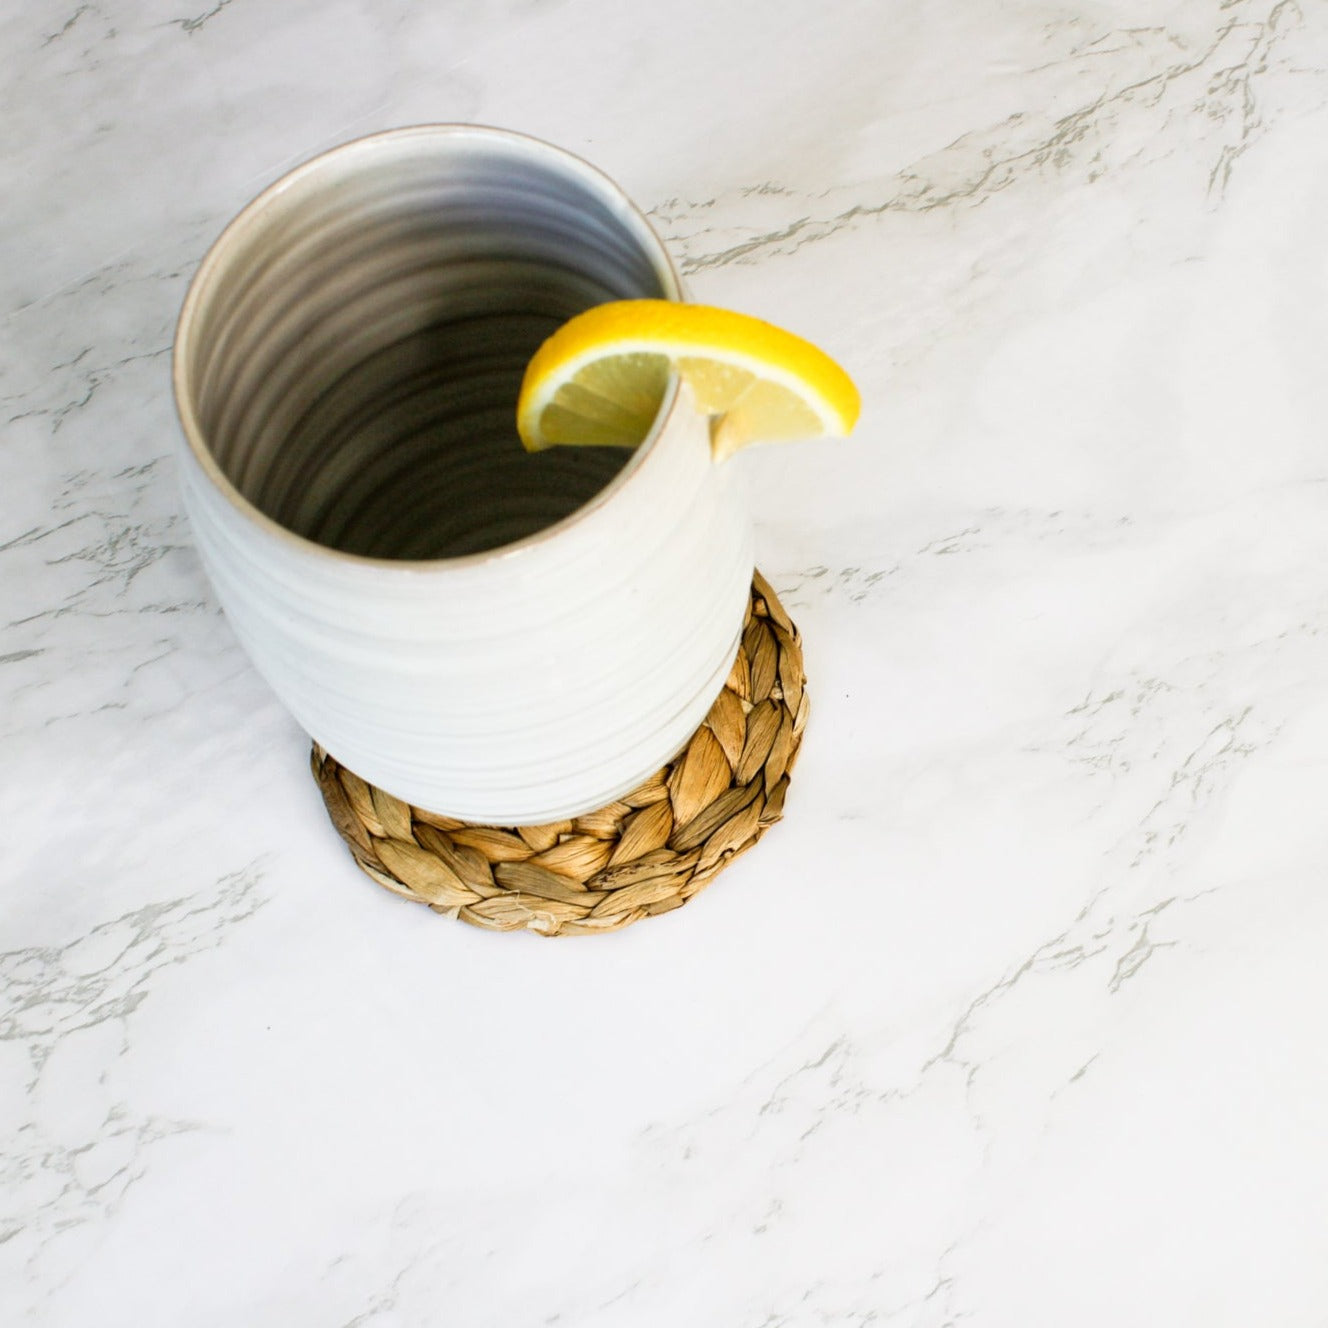 On a marble countertop, our tall tumbler sits on one of our round seagrass coasters.